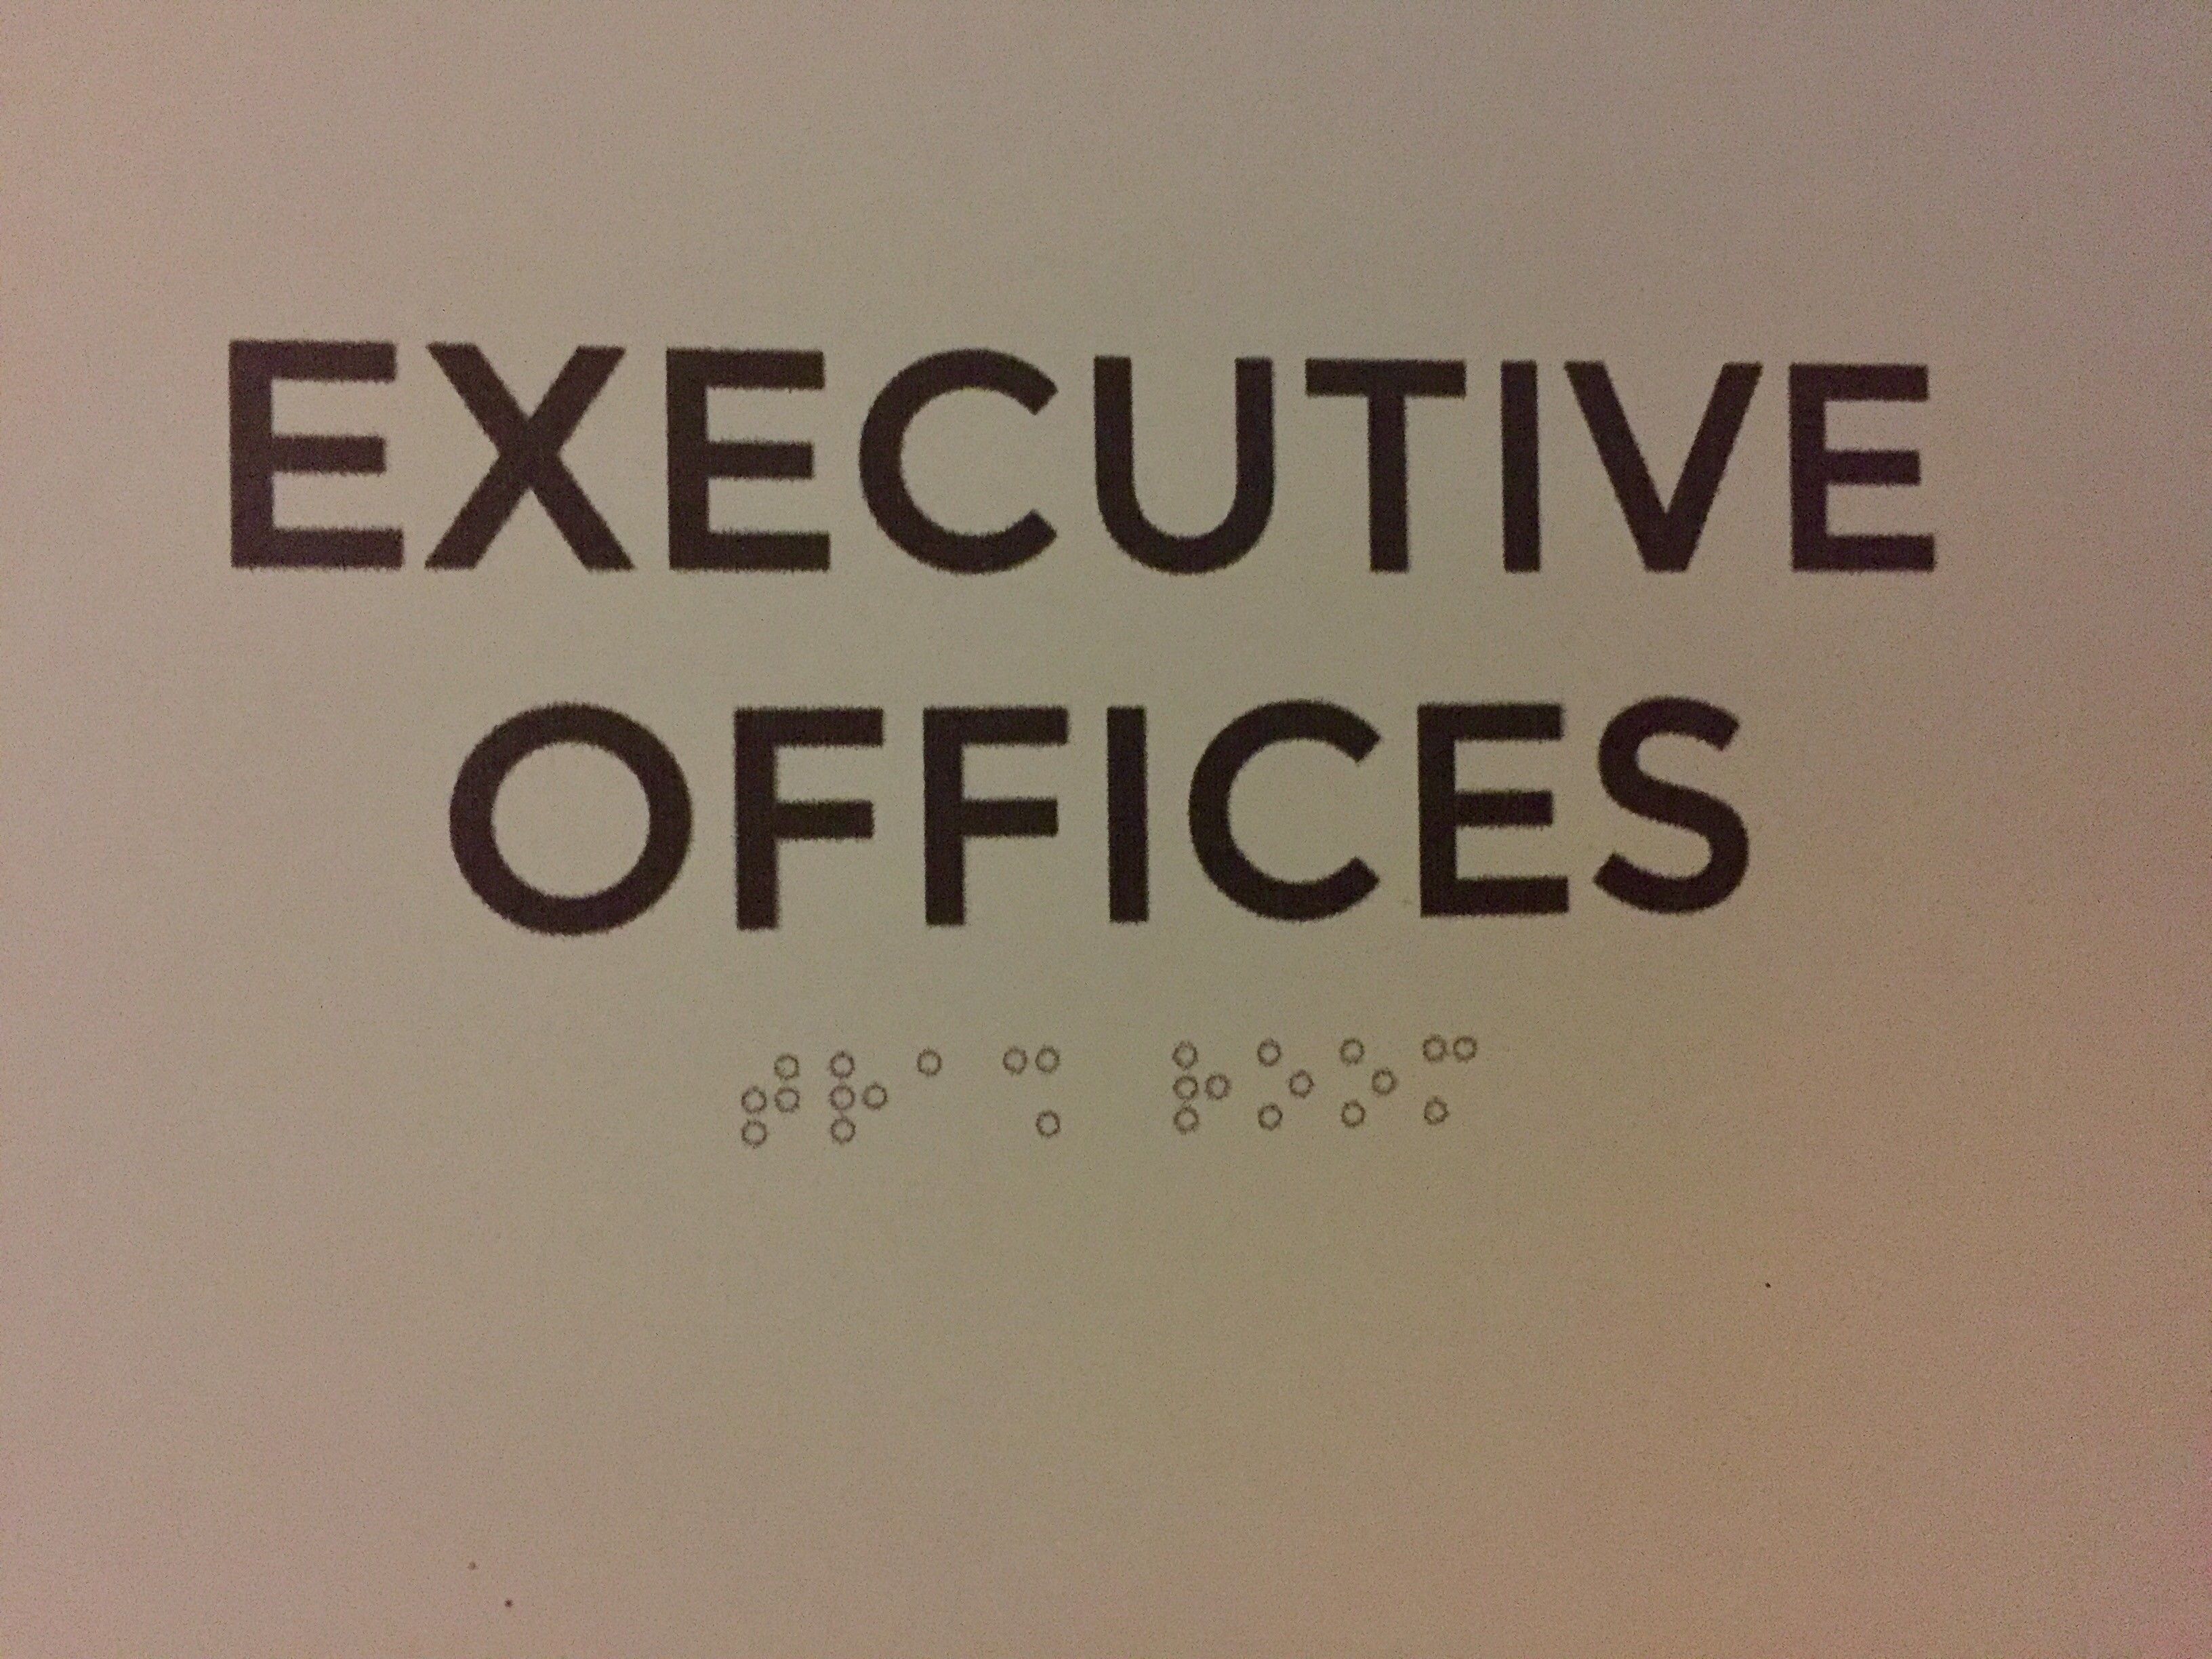 The braille on the "Executive Offices" sign outside where I work is both flat and says "Trash Room"